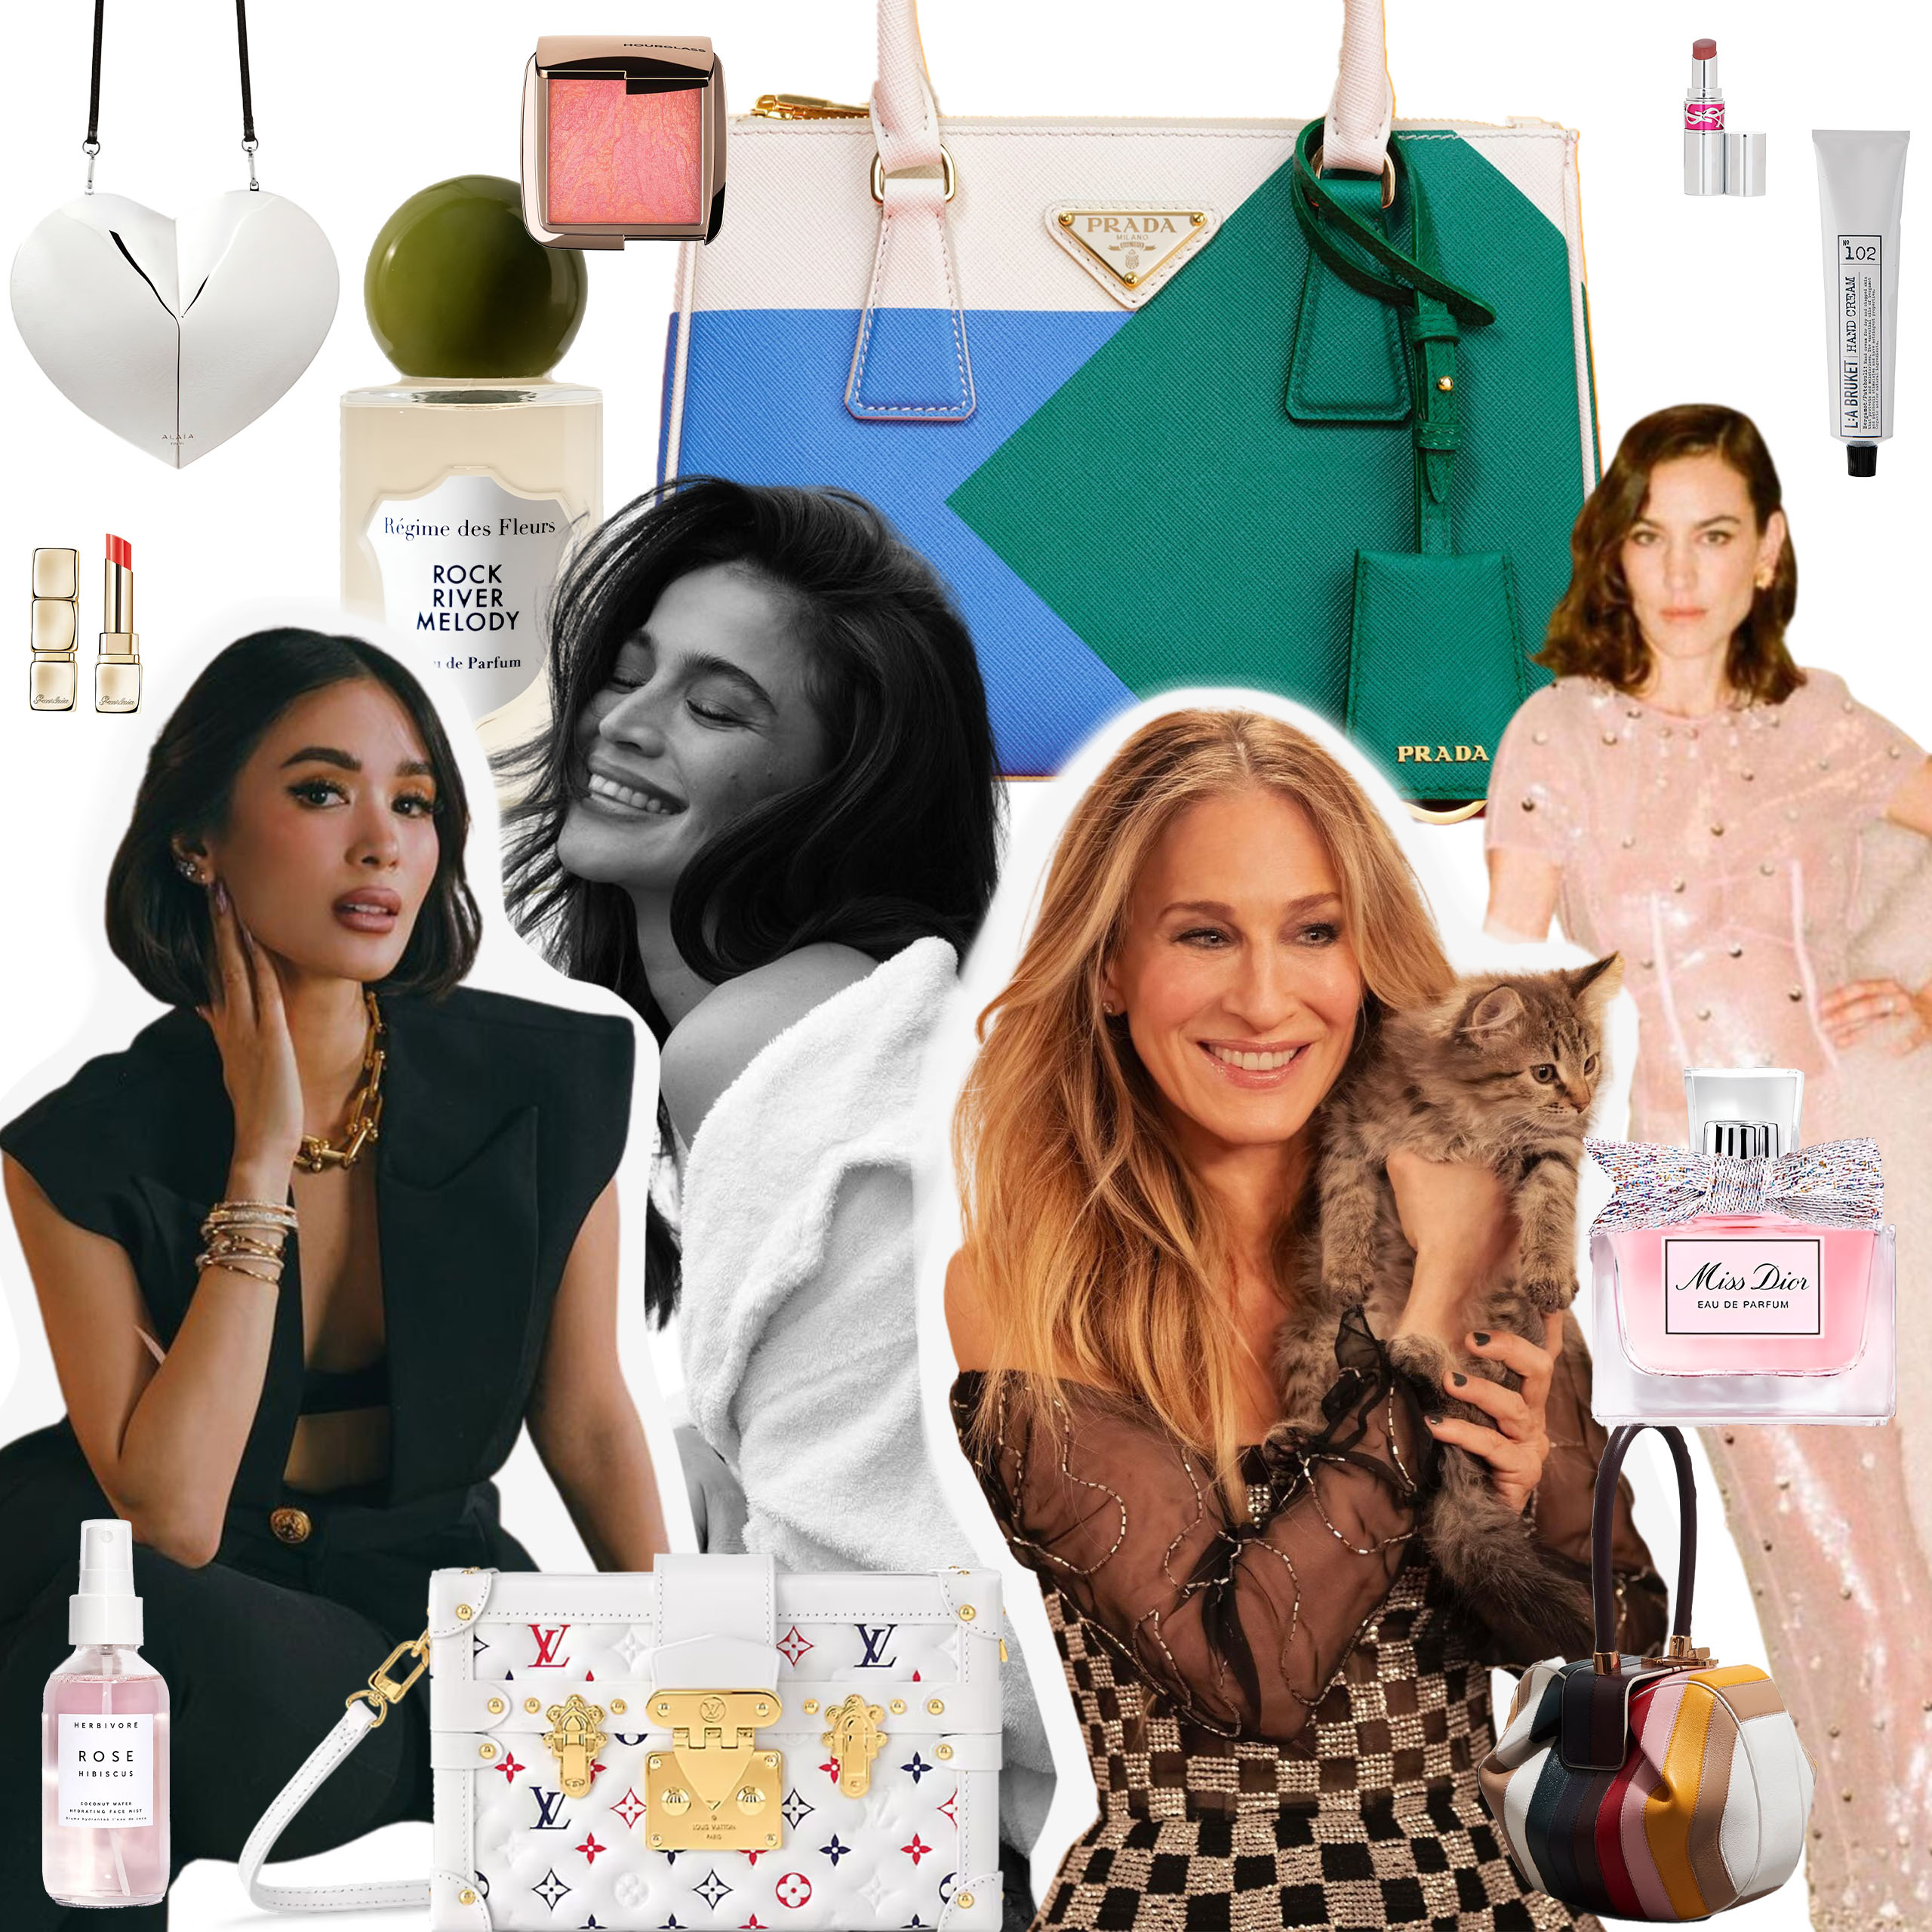 Your Fashion It-Girl Personality Based on What’s Inside Your Bag